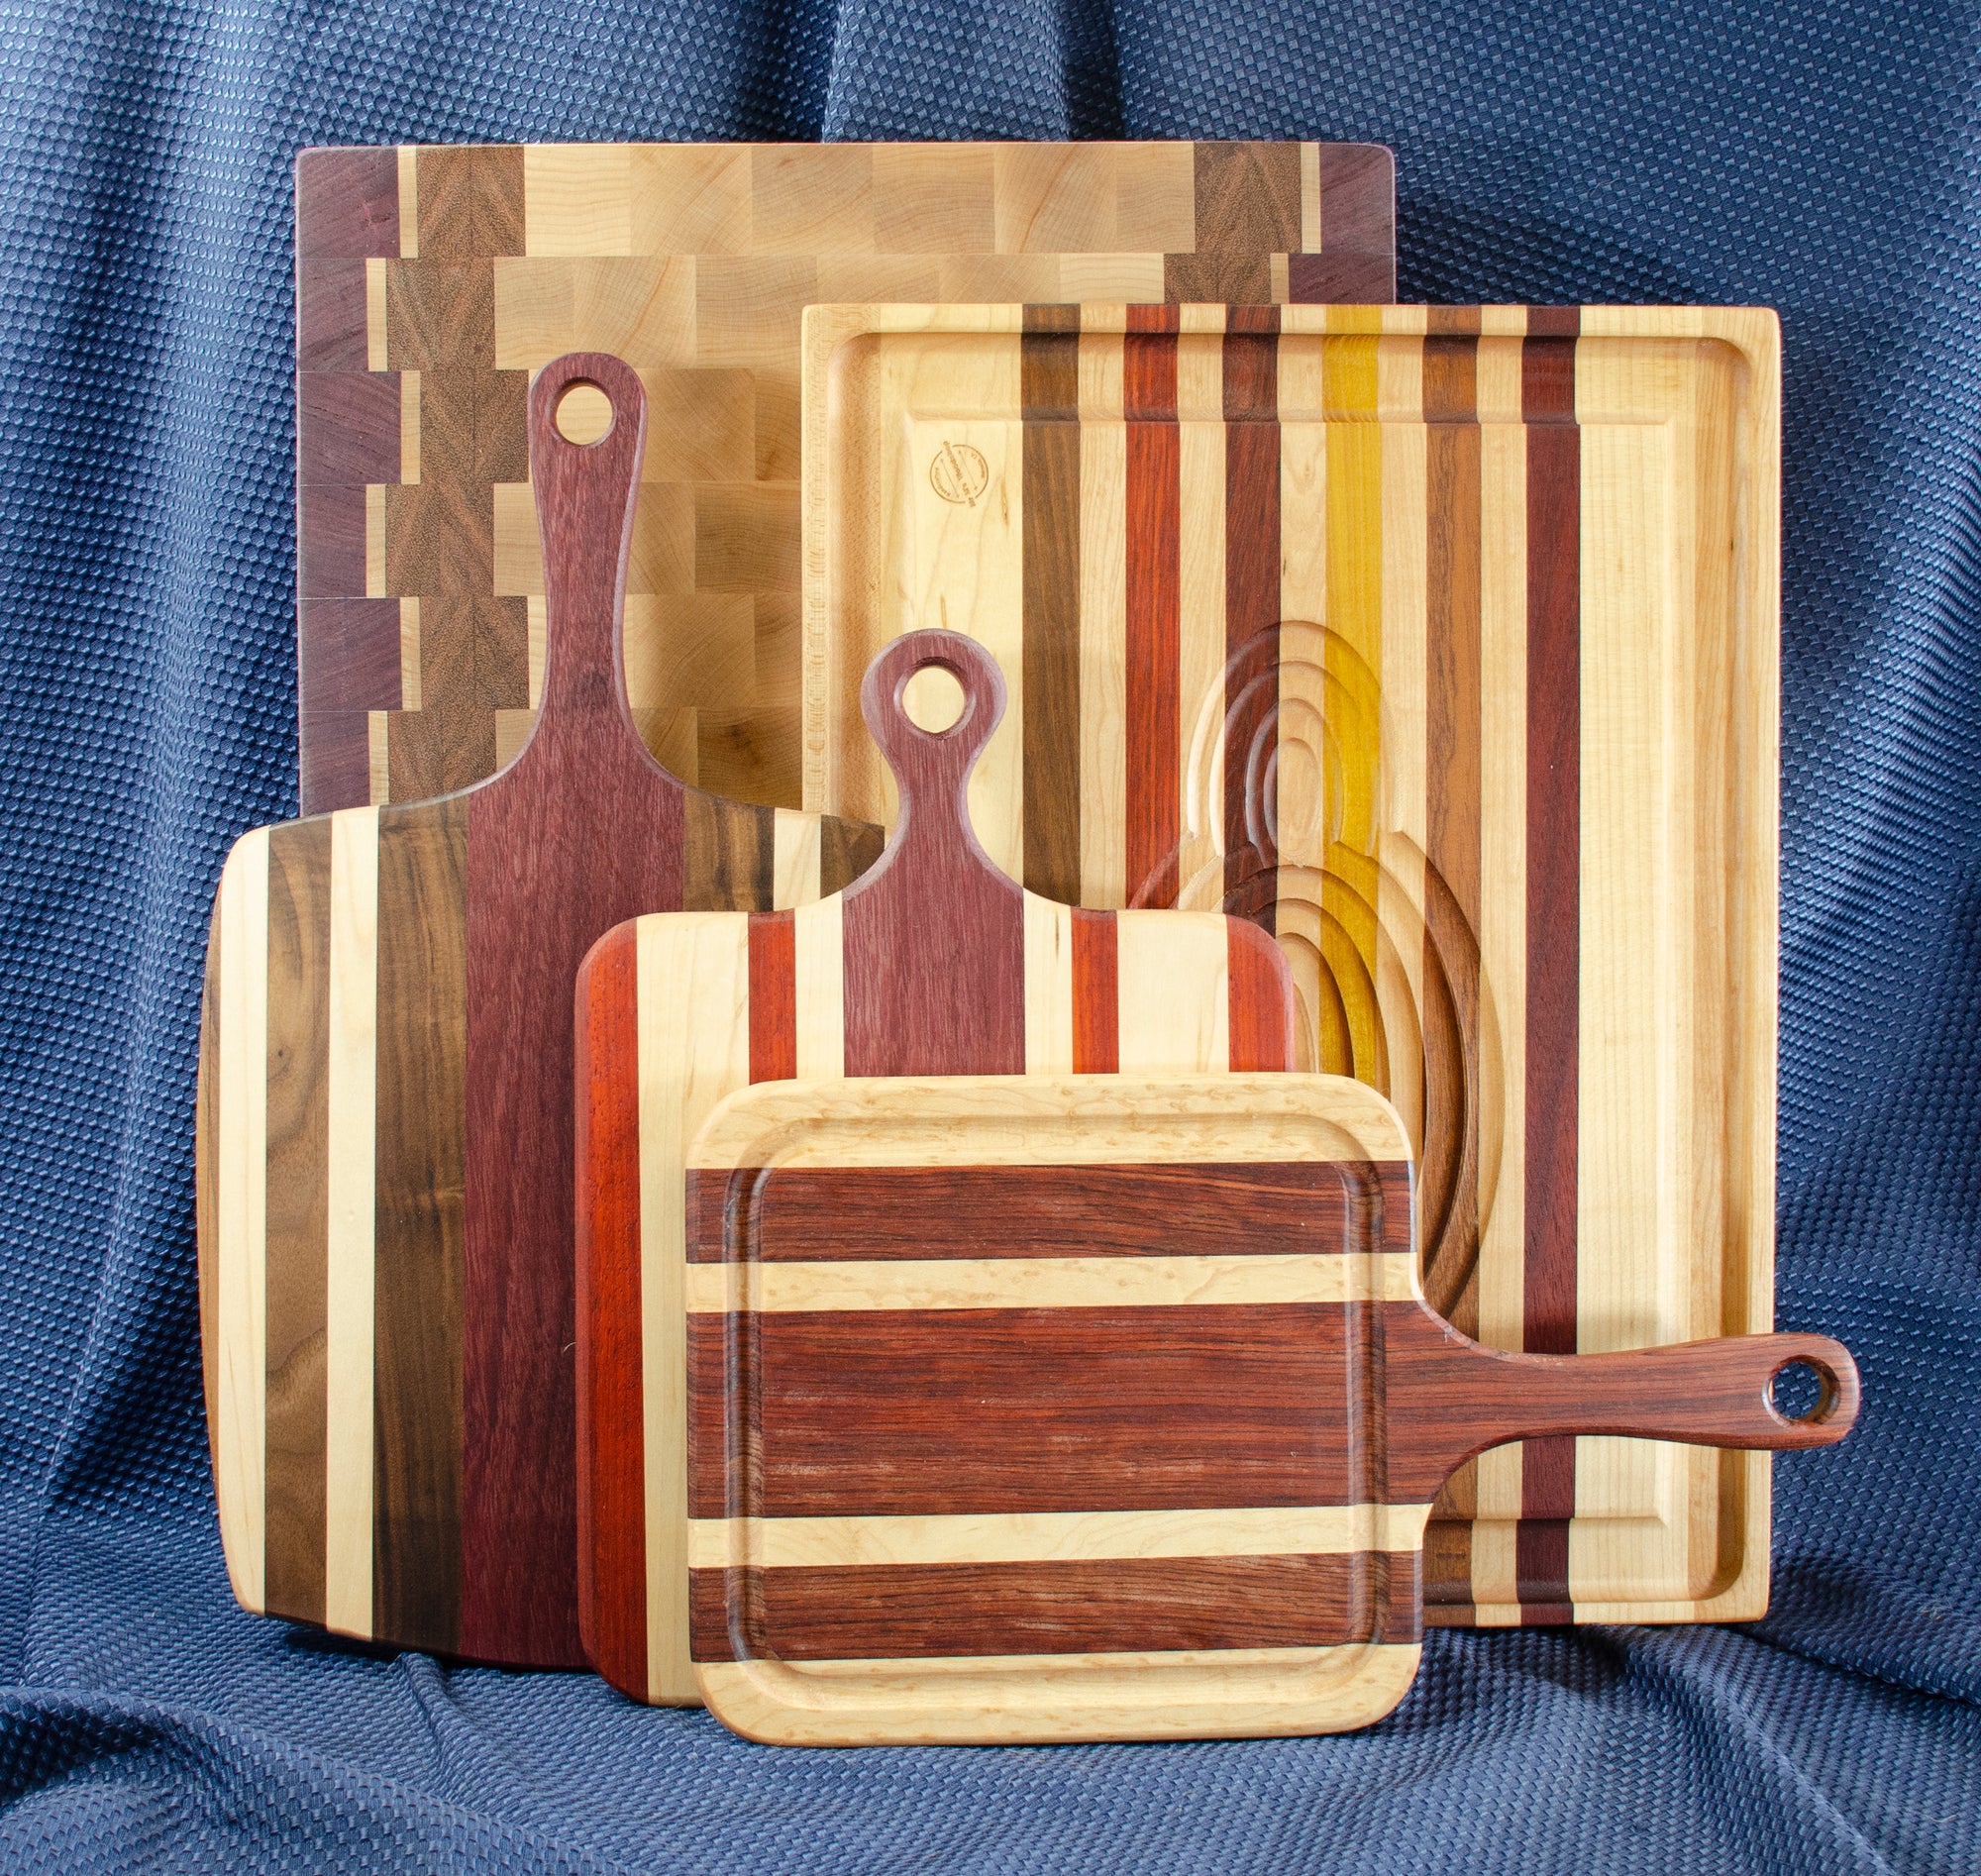 Cutting Board 101: Care & Cleaning - Mr M's Woodshop